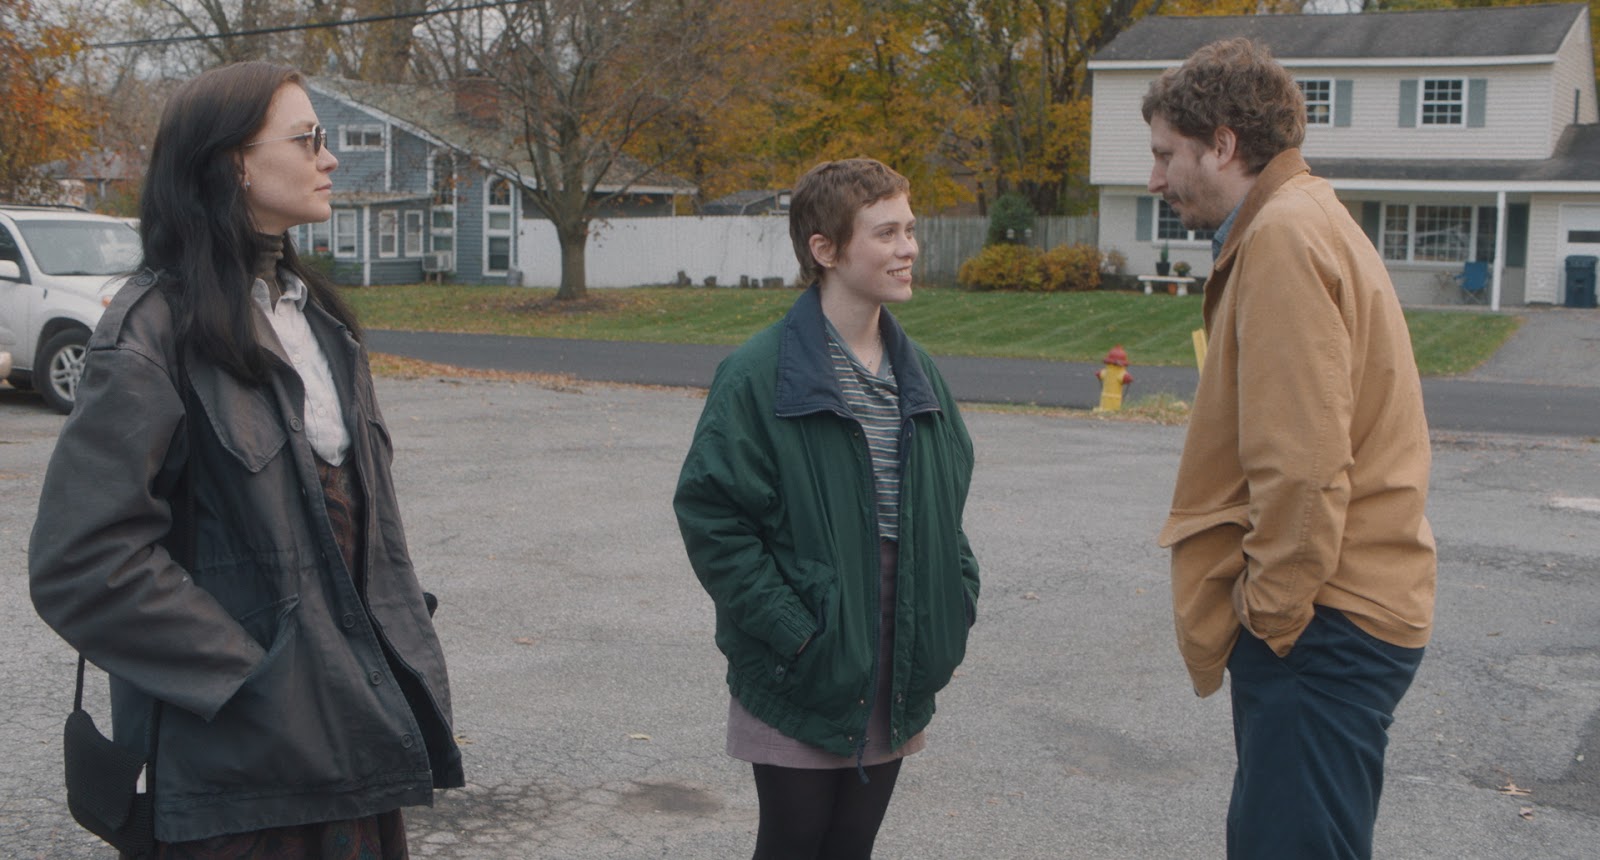 From the film The Adults, two women are talking to a man, played by Michael Cera, while standing on the cement outside of a suburban neighborhood.